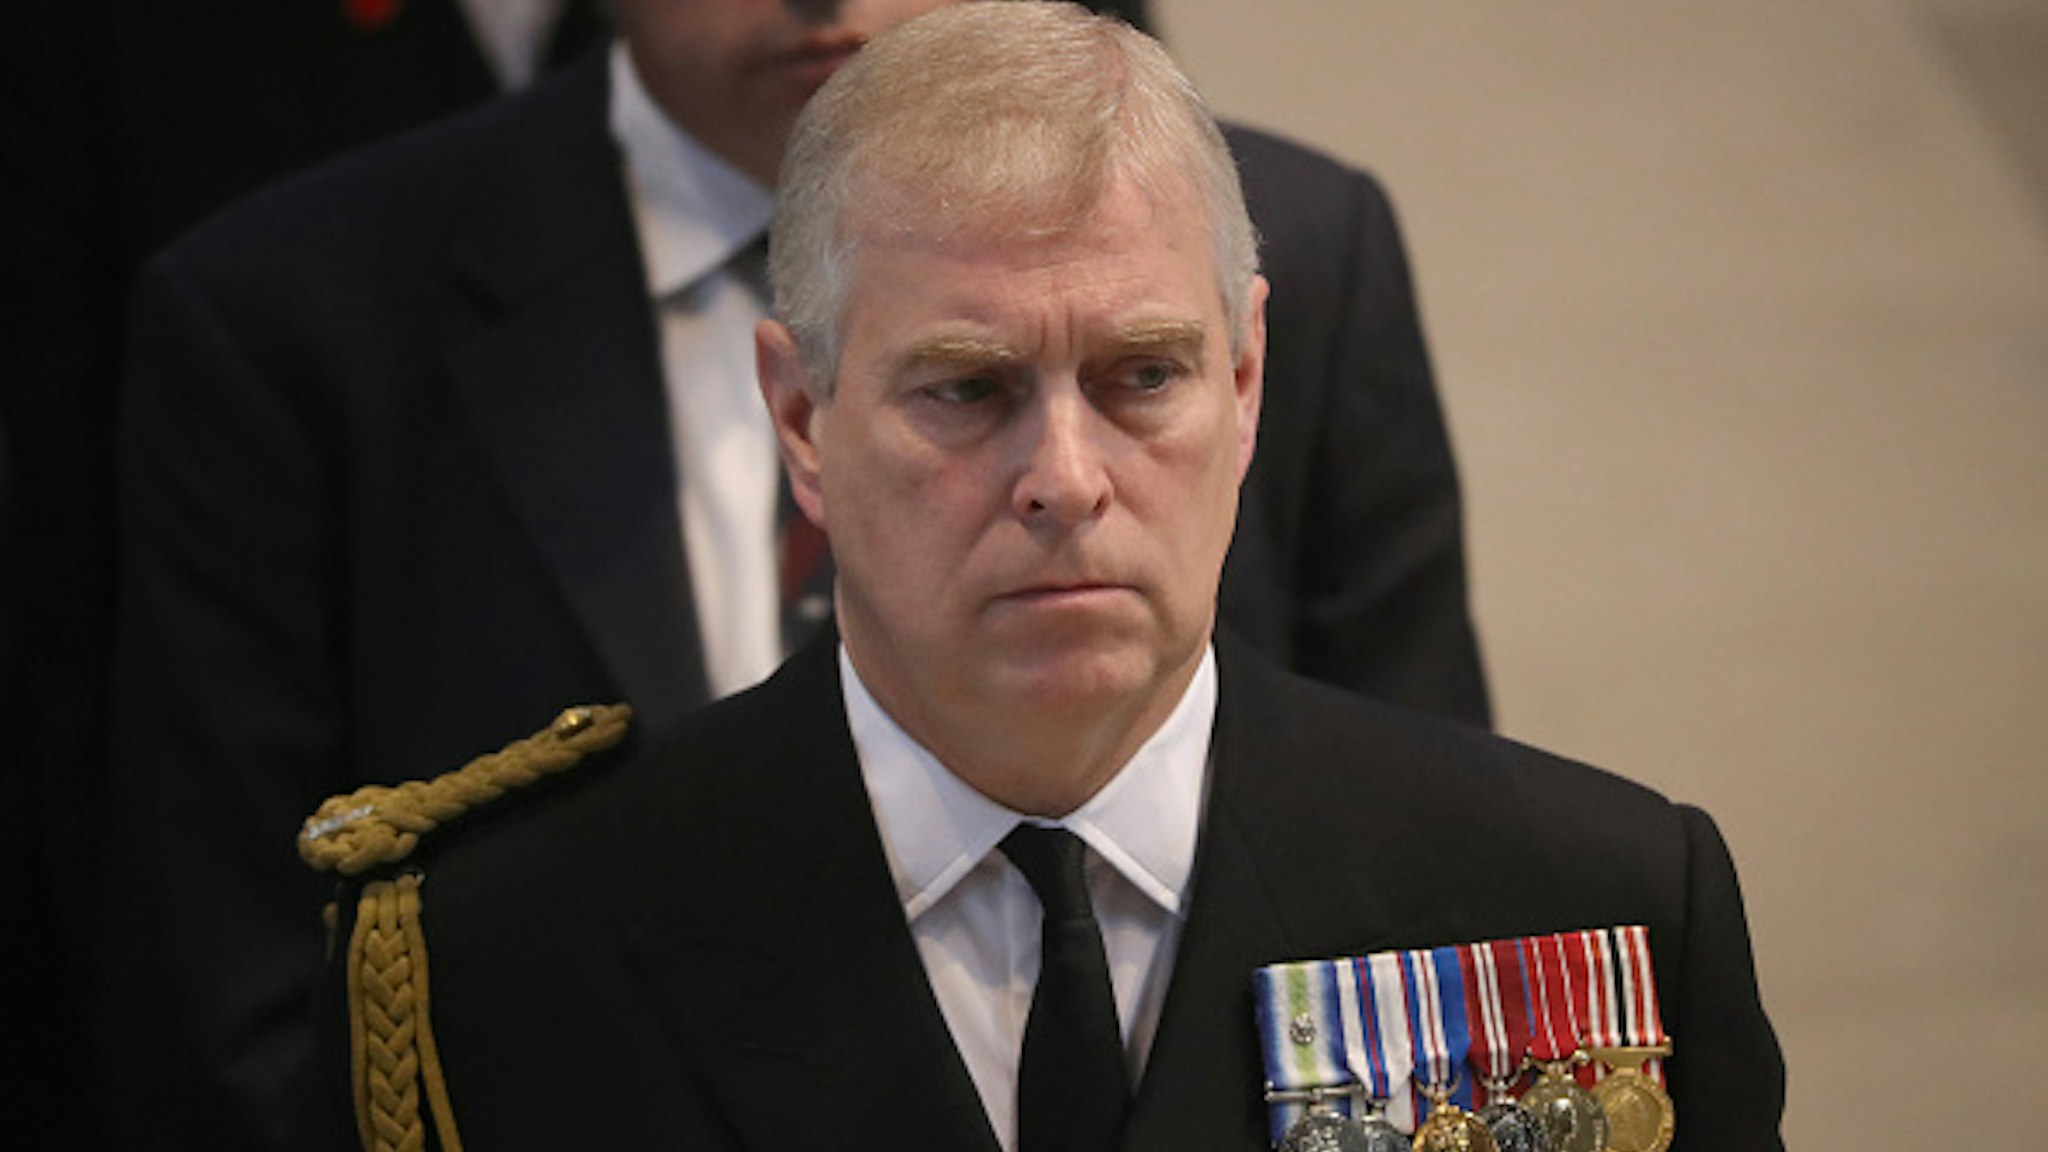 MANCHESTER, ENGLAND - JULY 01: Prince Andrew, Duke of York, attends a commemoration service at Manchester Cathedral marking the 100th anniversary since the start of the Battle of the Somme. July 1, 2016 in Manchester, England. Services are being held across Britain and the world to remember those who died in the Battle of the Somme which began 100 years ago on July 1st 1916. Armies of British and French soldiers fought against the German Empire leading to over one million lives being lost.